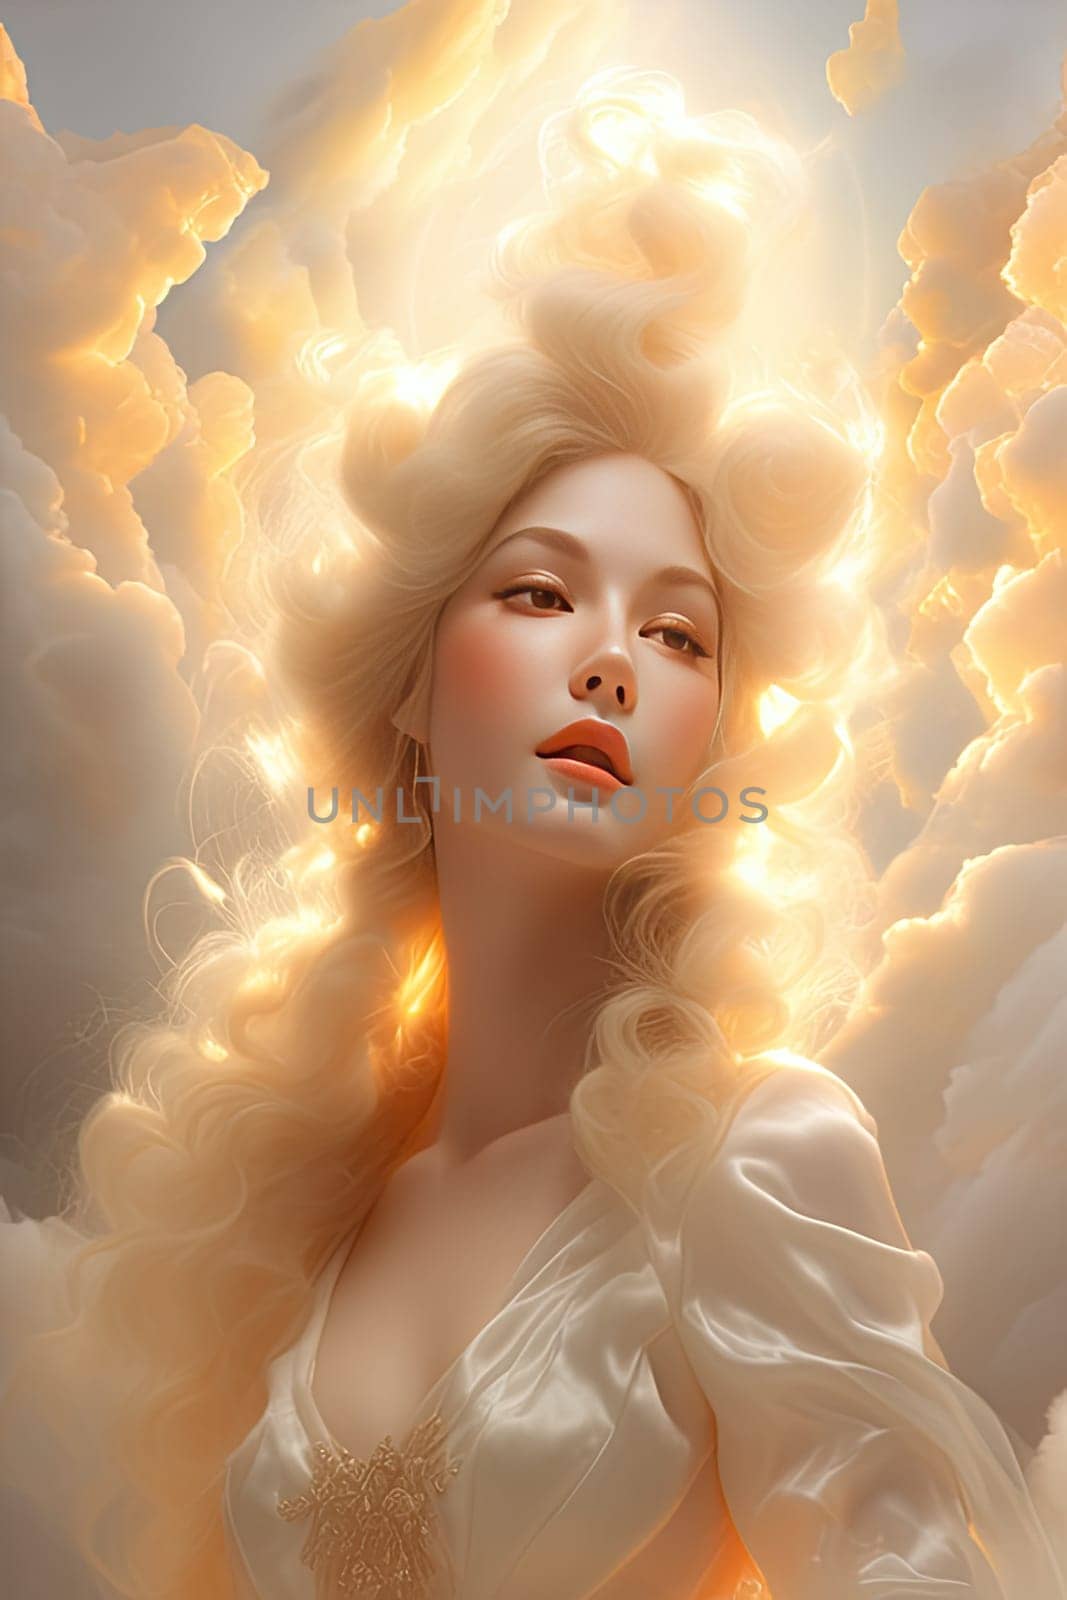 Airy art of enchanting goddess woman with divine light on clouds sky in Renaissance style, tender peach fuzz tone by Clara_Sh